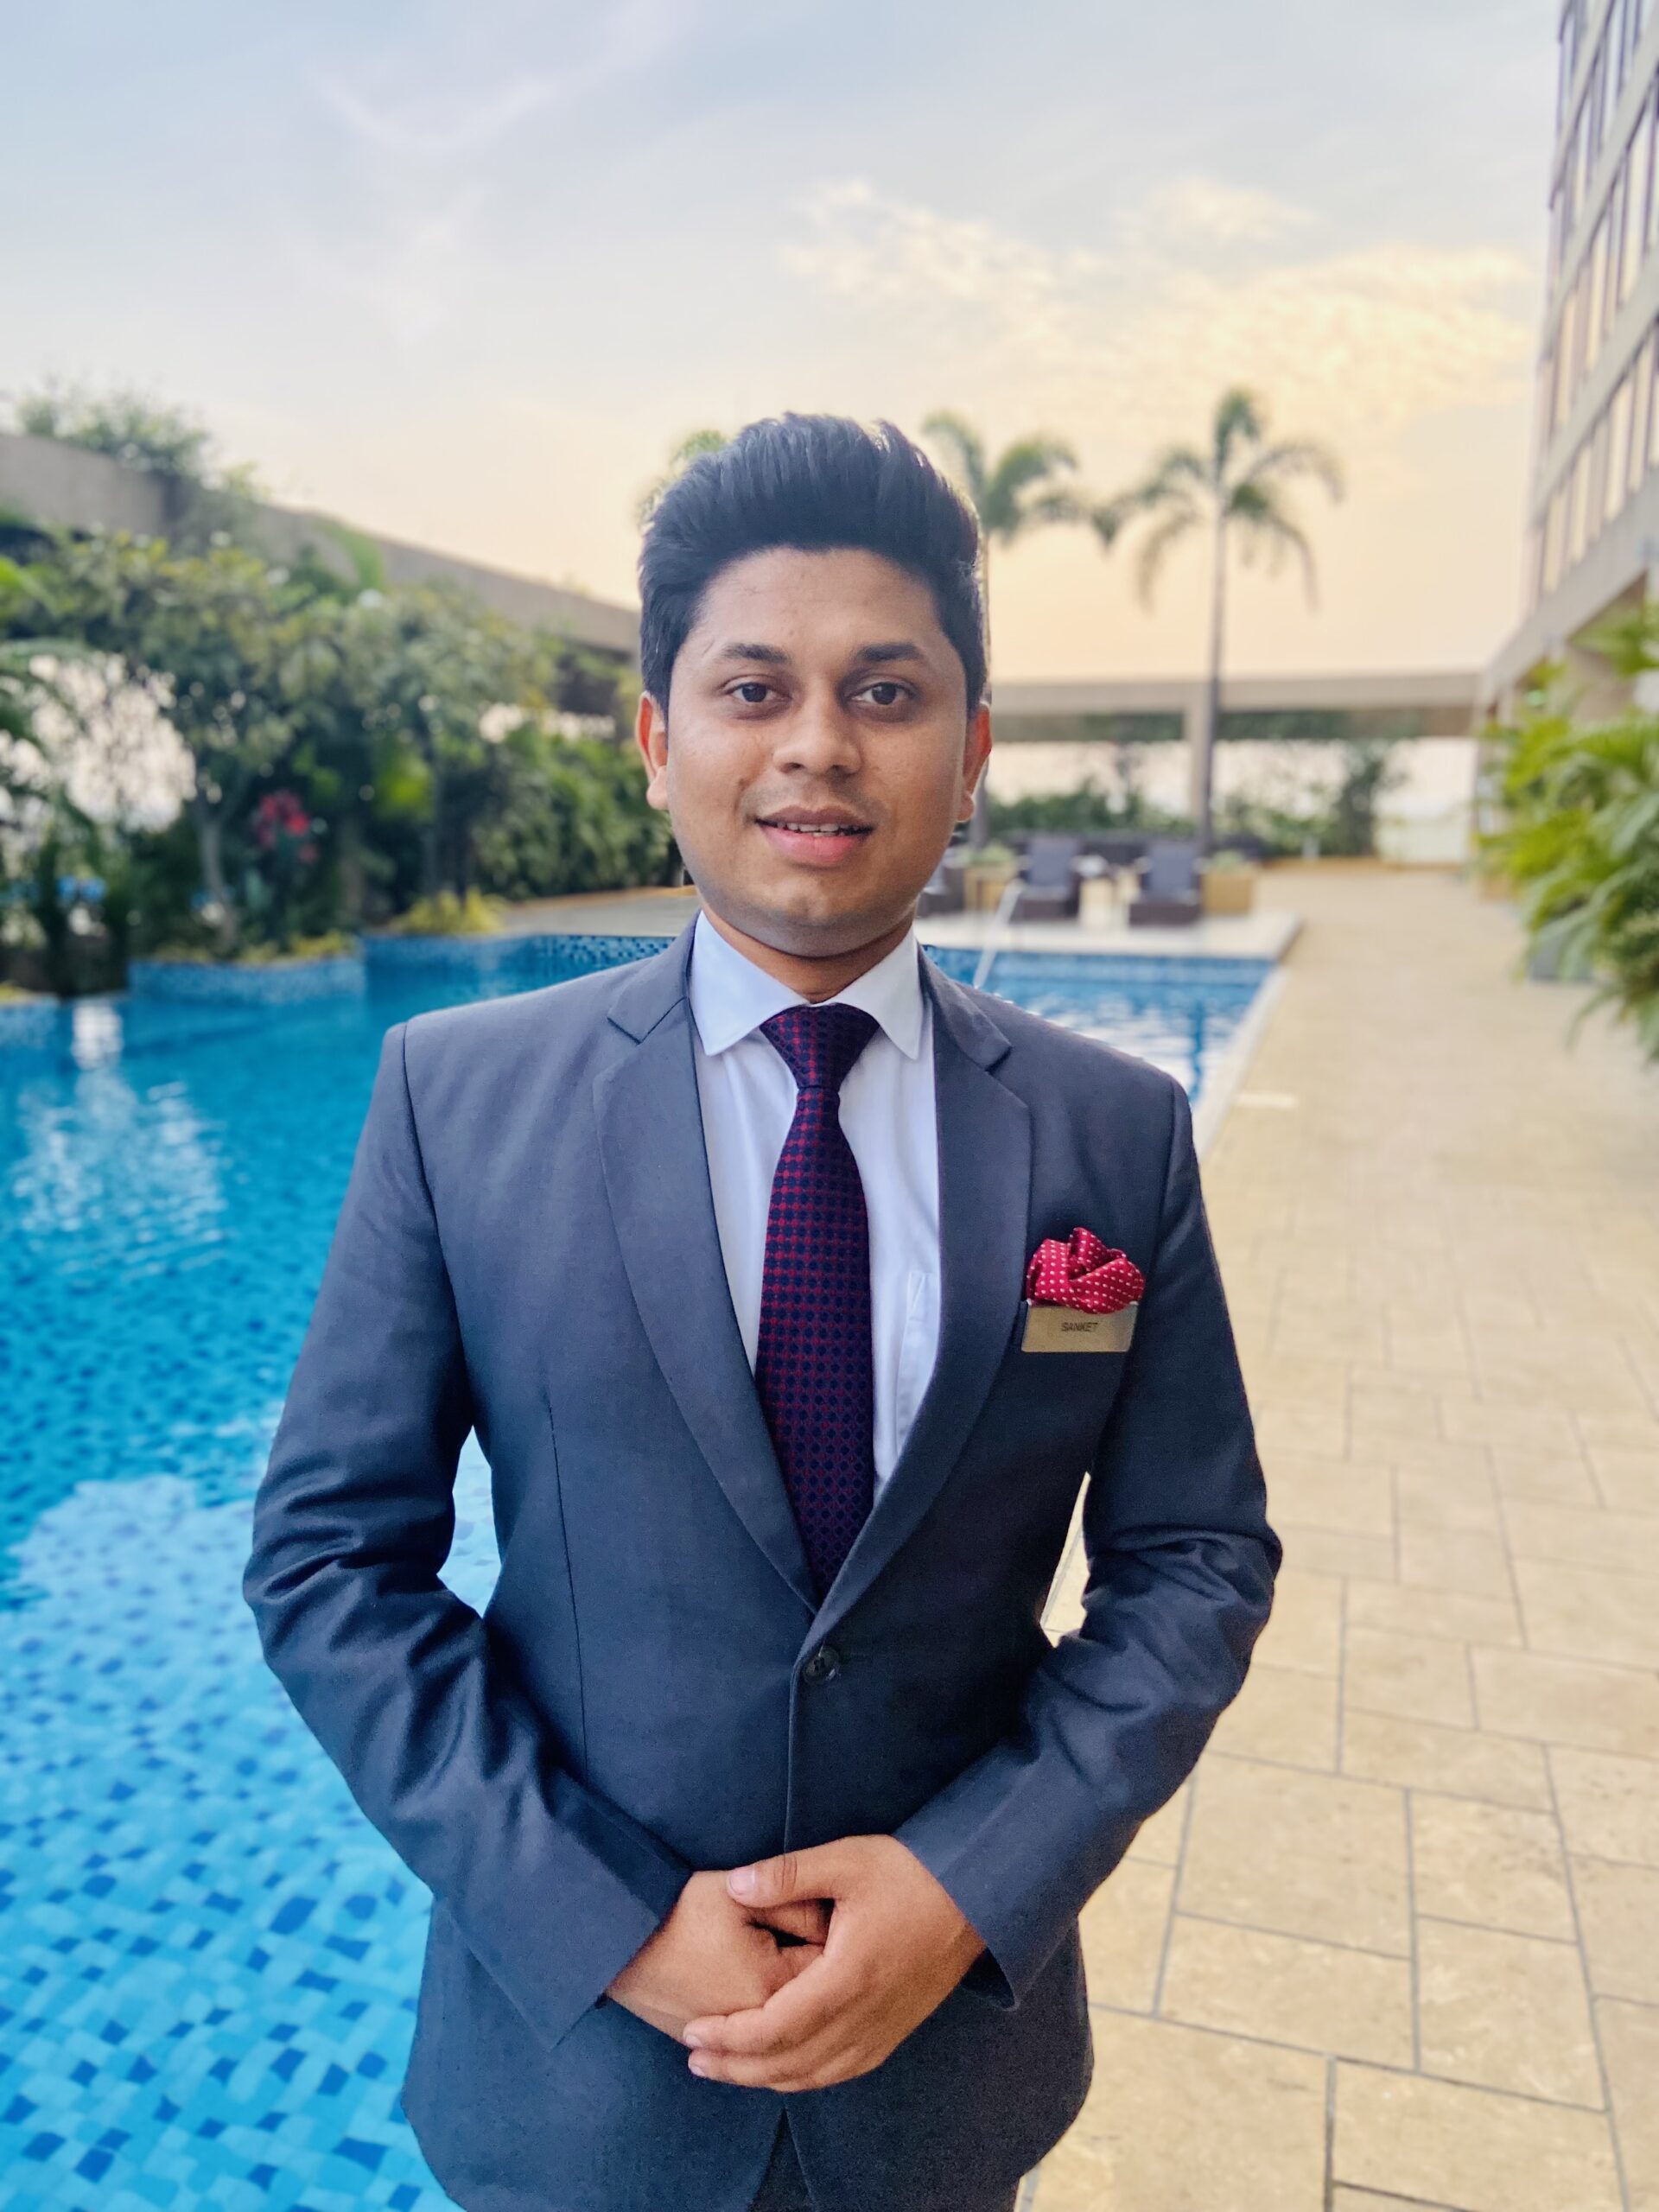 Courtyard by Marriott Pune Chakan appoints Sanket Gadikar as the Assistant Sales Manager